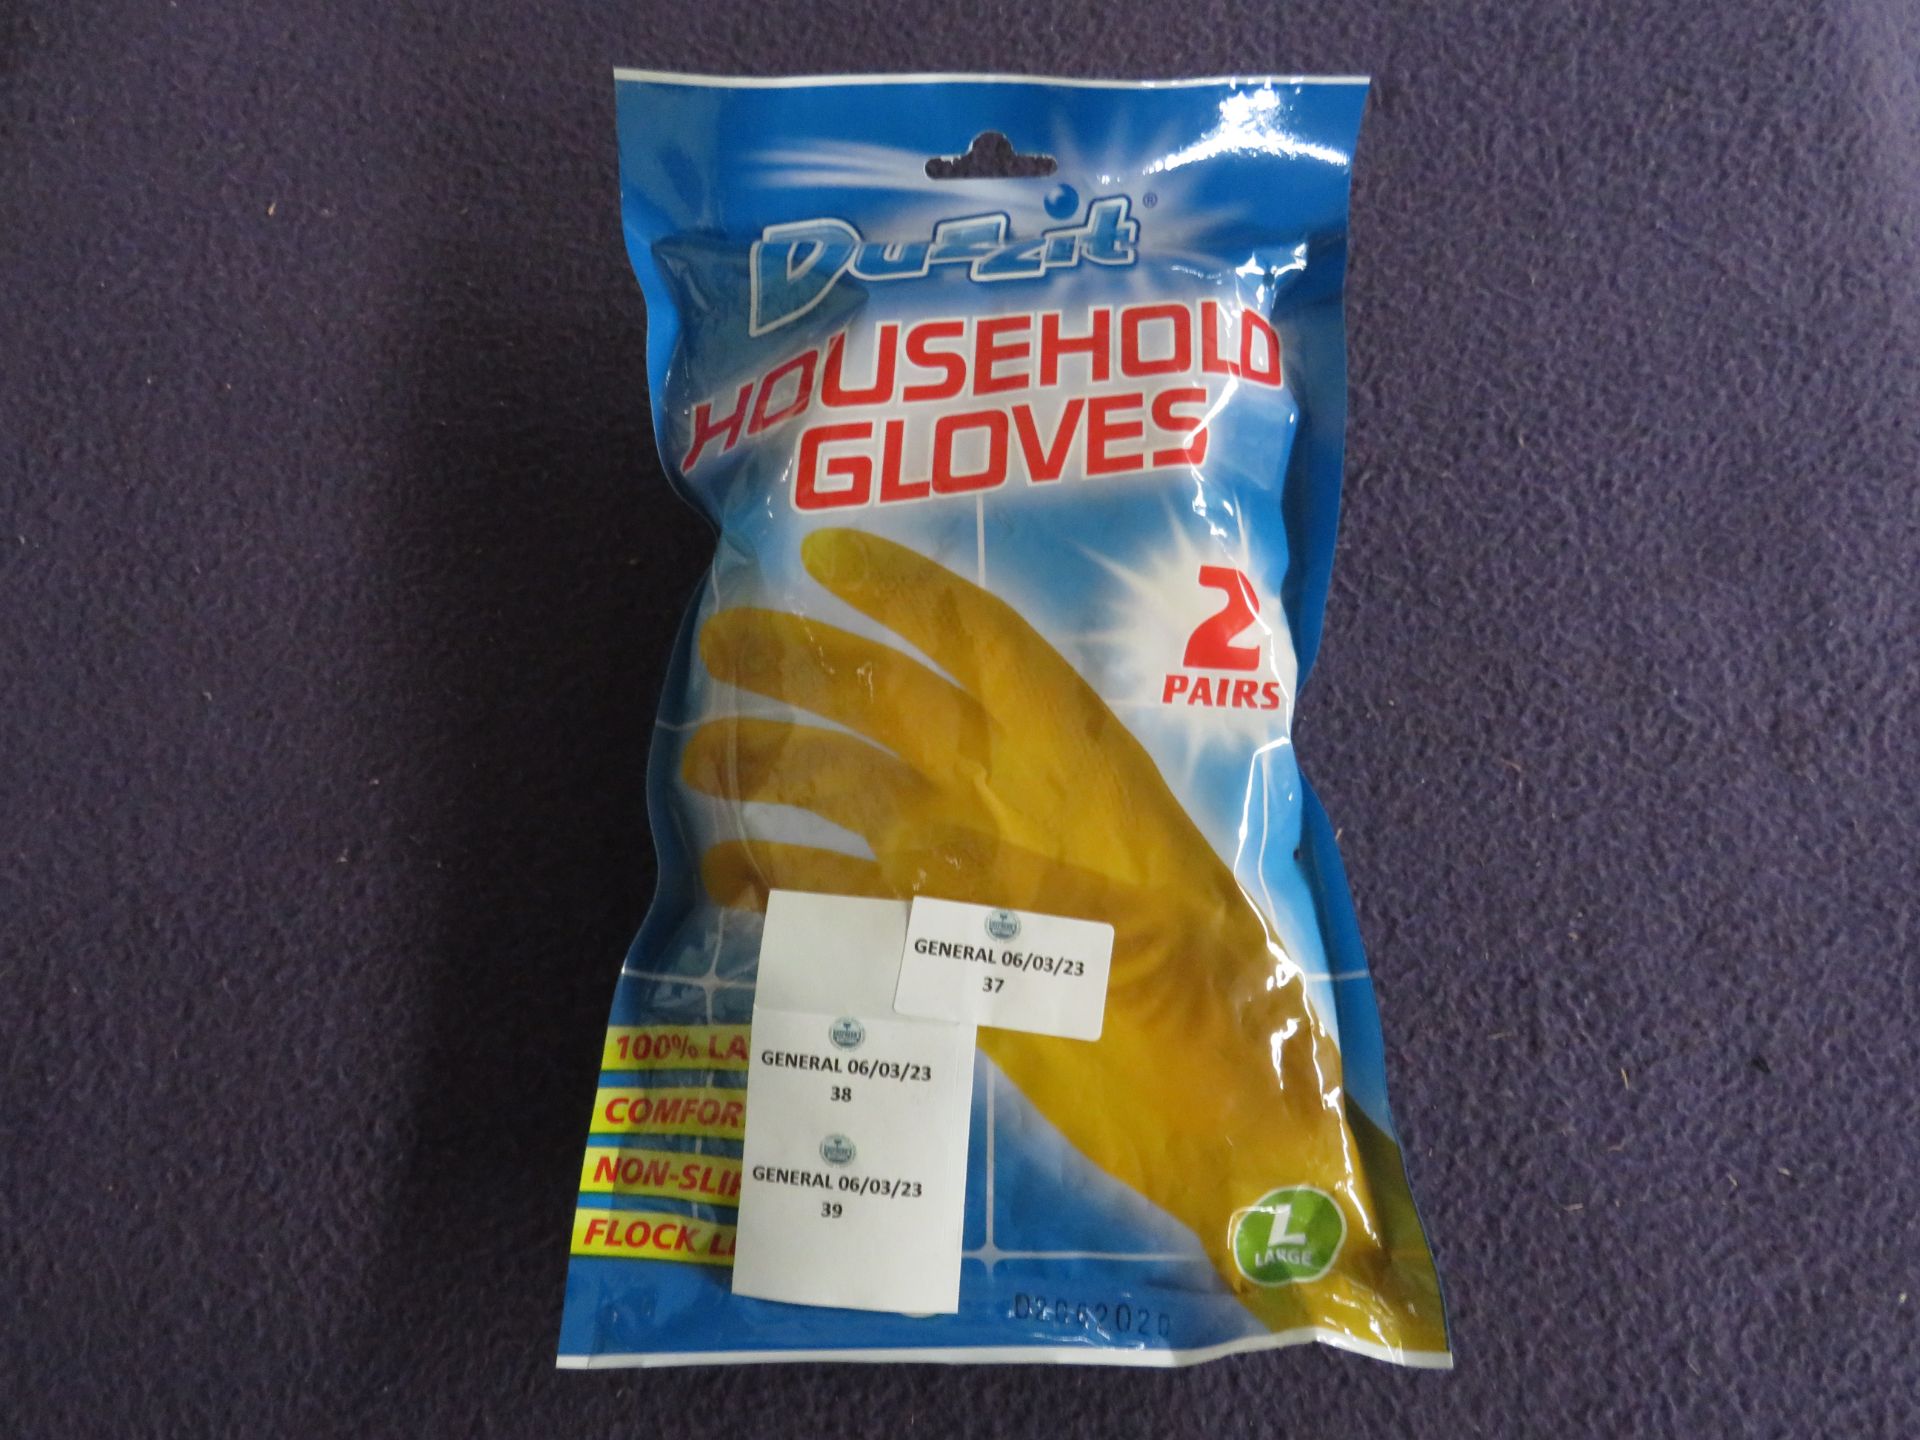 12x Duzzit - Household Gloves ( 2 Pairs Per Pack ) - Size L - Unused & Boxed.